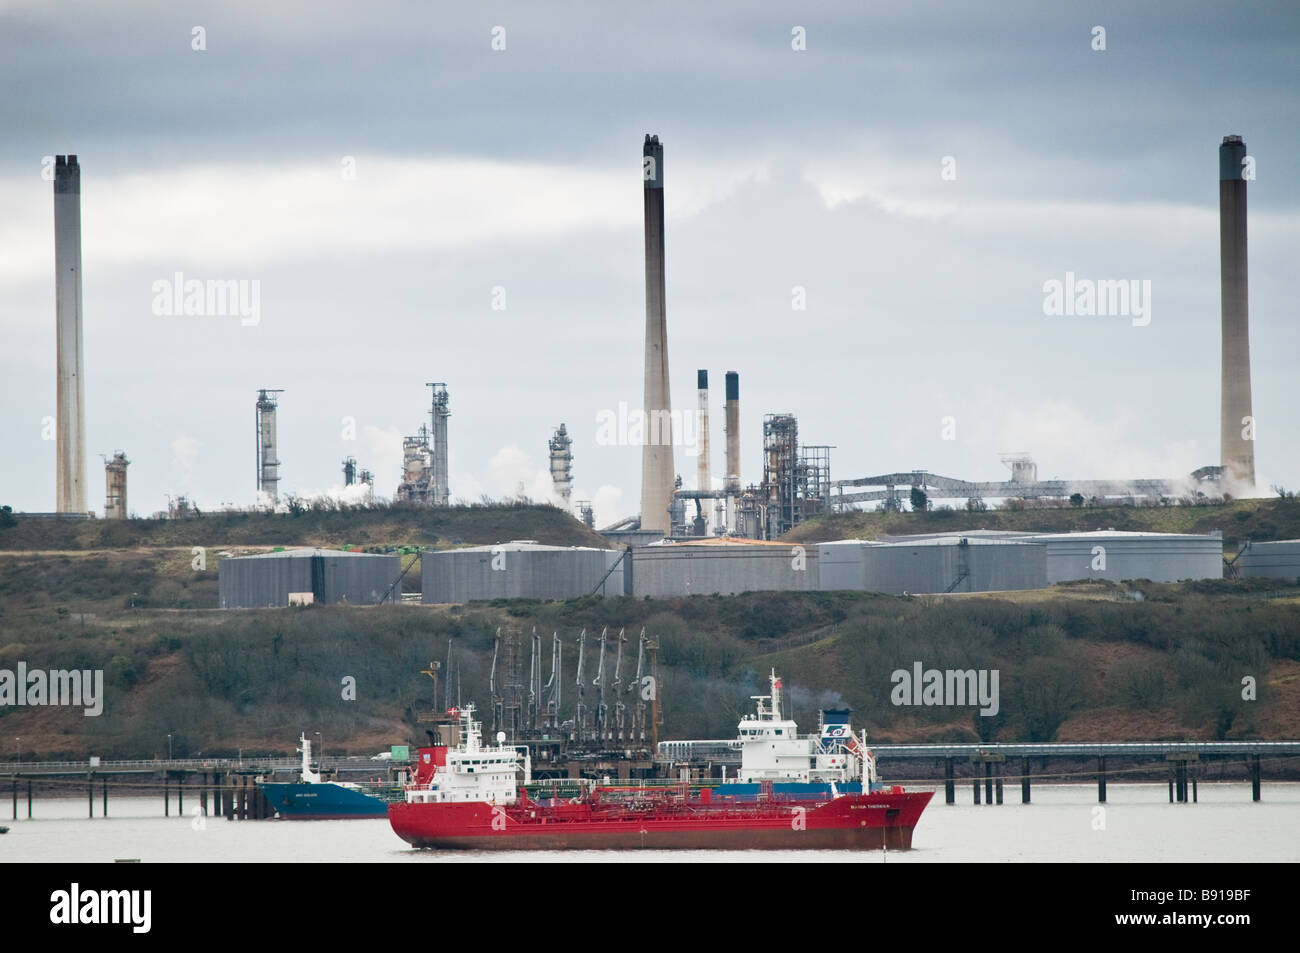 Oil tankers and refineries at Milford Haven Pembrokeshire Wales UK Stock Photo